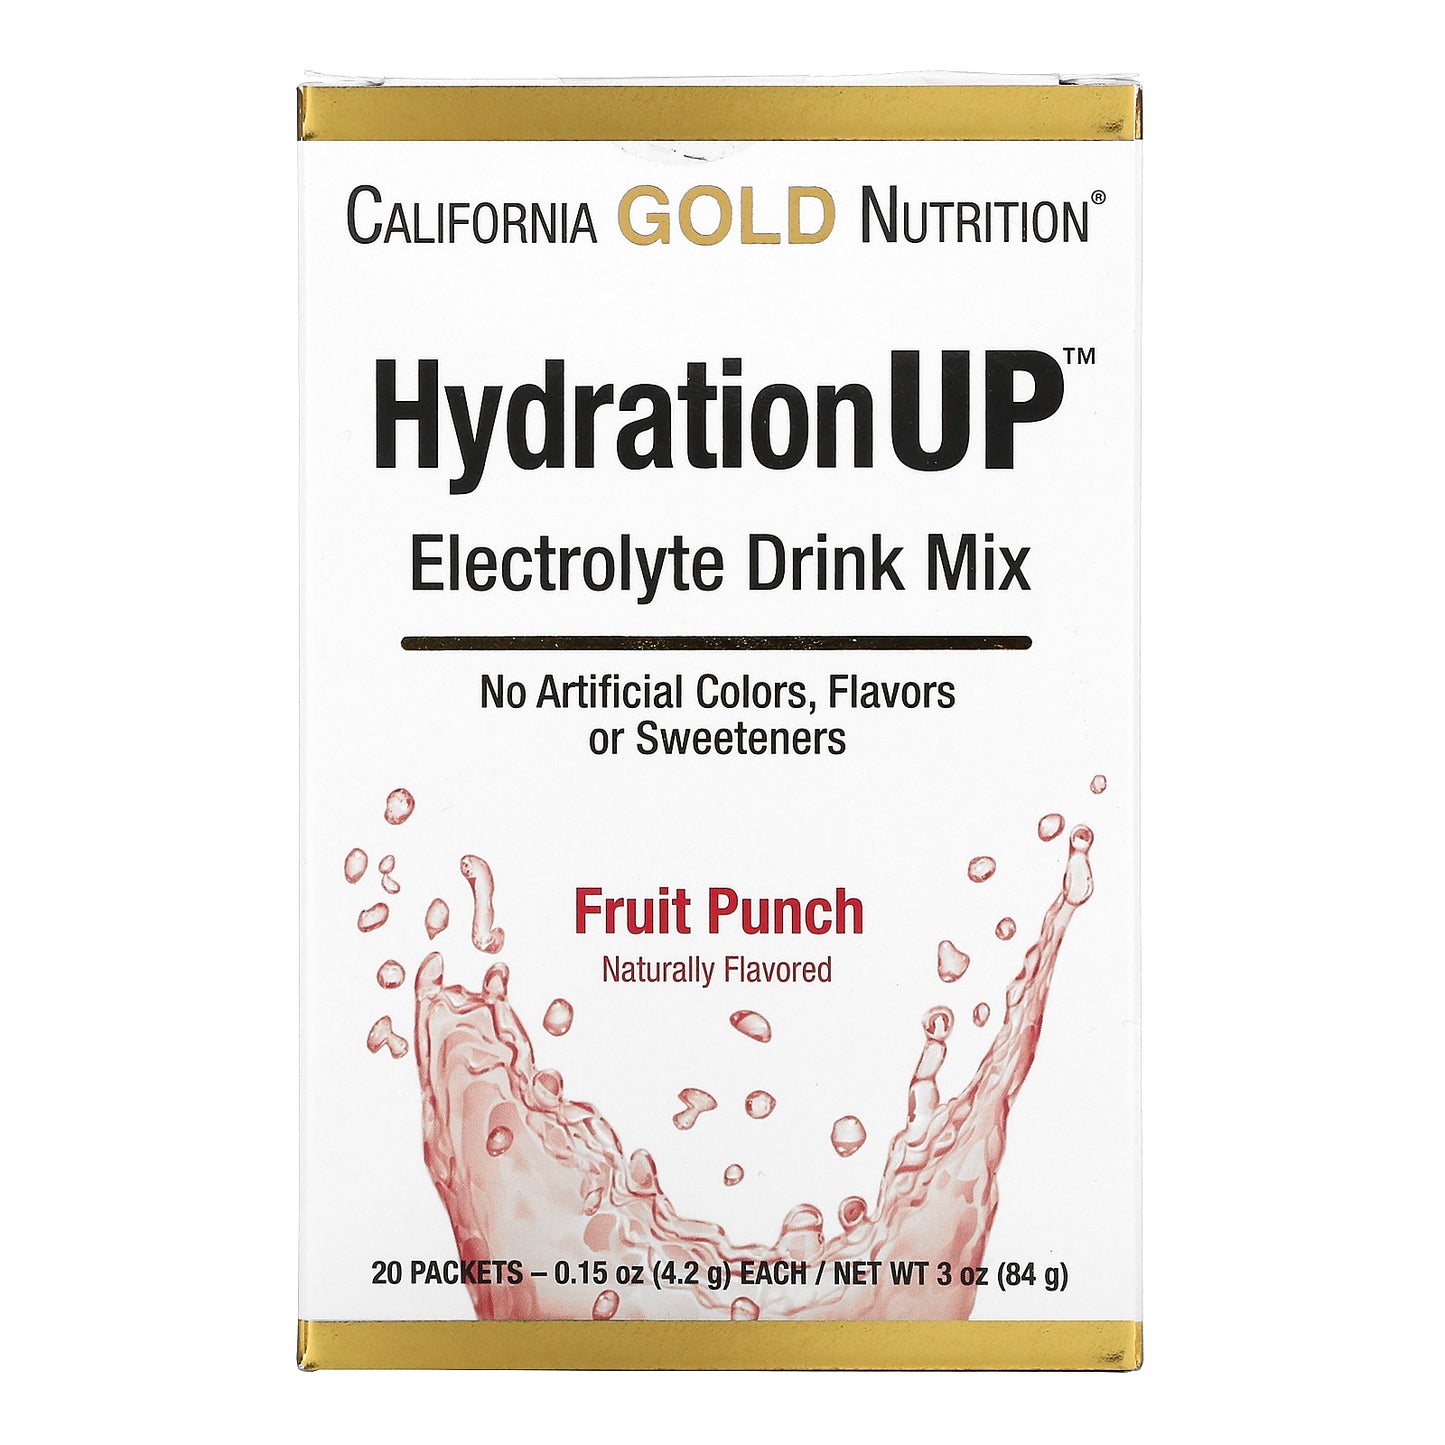 California Gold Nutrition, HydrationUP, Electrolyte Drink Mix, Fruit Punch, 20 Packets, 0.15 oz (4.2 g) Each